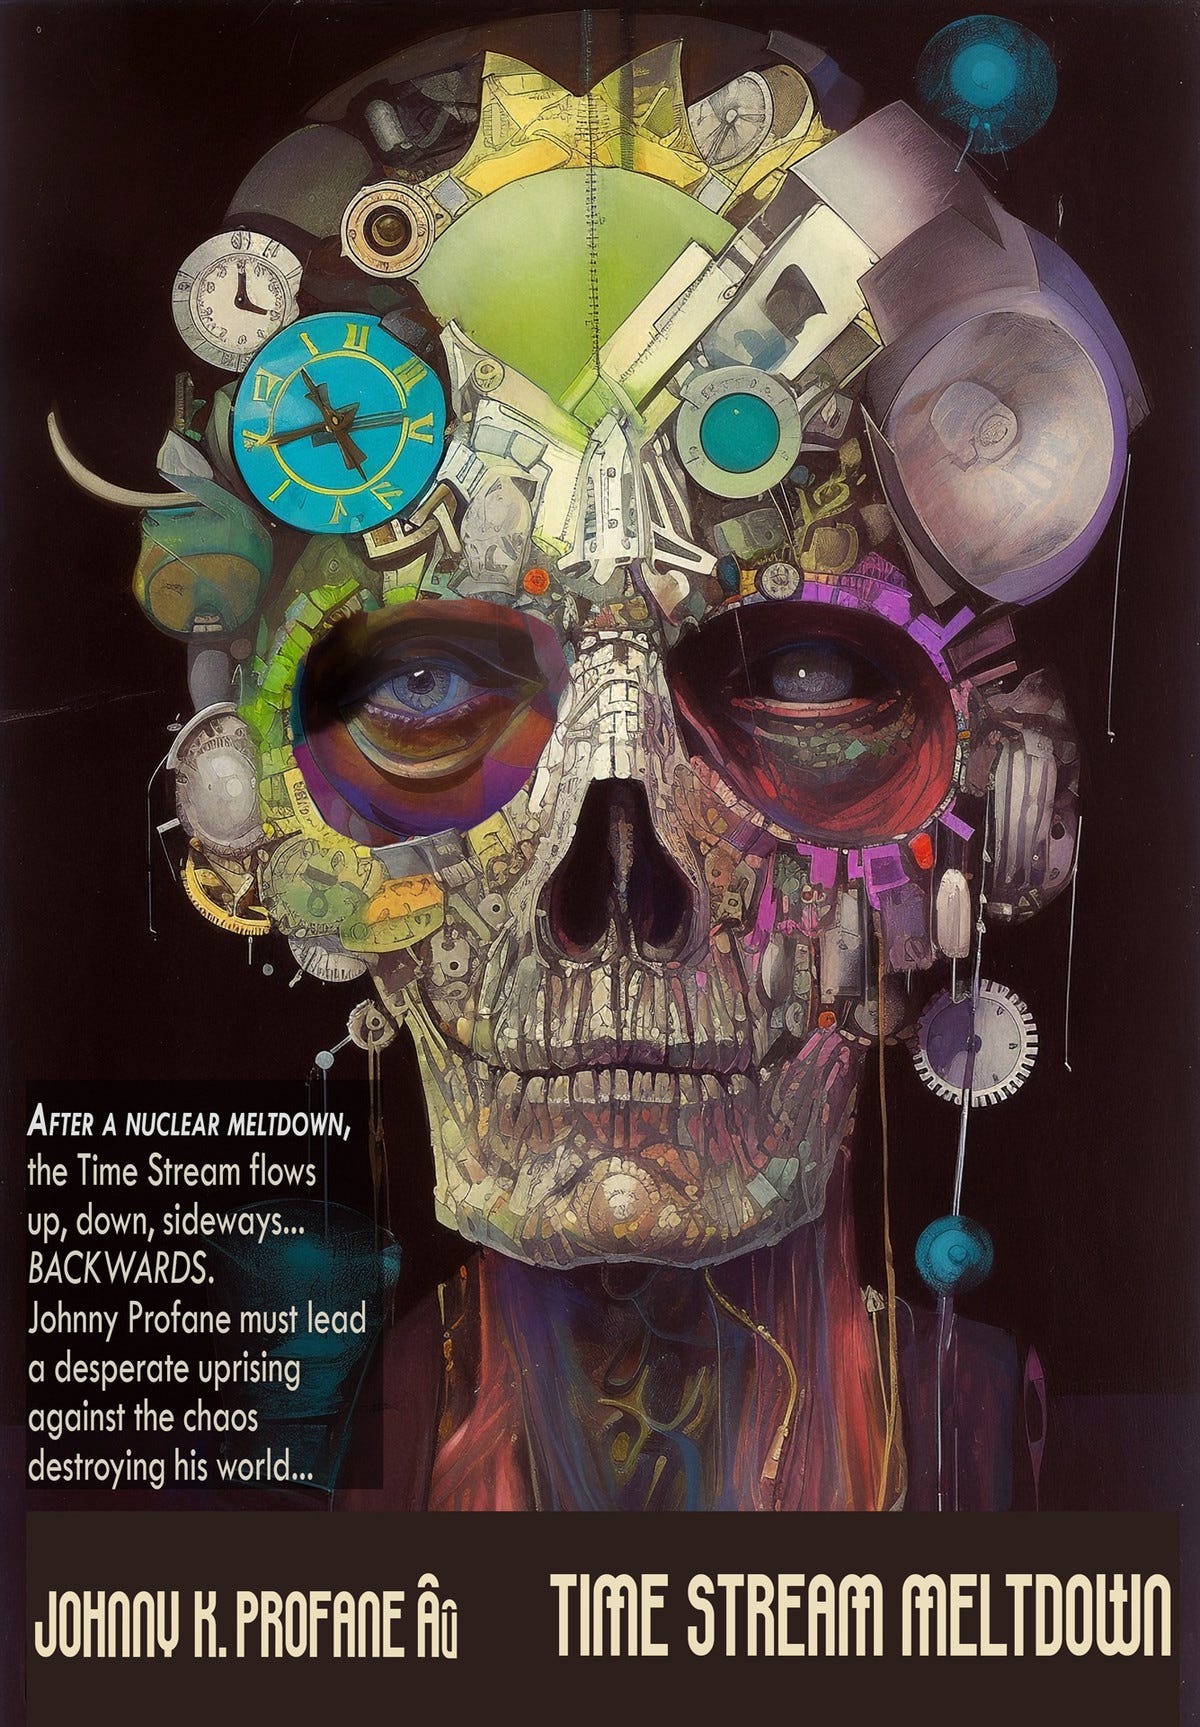 "In My Own Time," an imagined pulp fiction book cover, inspired by Bob Pepper's famous cover for "Do Androids Dream of Electric Sheep," by Philip K. Dick. A grotesque man's head, mixing elements of xray, skeleton, watches, watch parts. He stares with one living and one dead eye at the reader. Title reads: "Johnny Profane Âû -- Time Stream Meltdown." Teaser text reads: "After a nuclear meltdown, the Time Stream flows up, down, sideways… Backwards. Johnny Profane must lead a desperate uprising against the chaos destroying his world…" A mixture of Midjourney prompts, sketching, photos and more. Digital tools included AI.